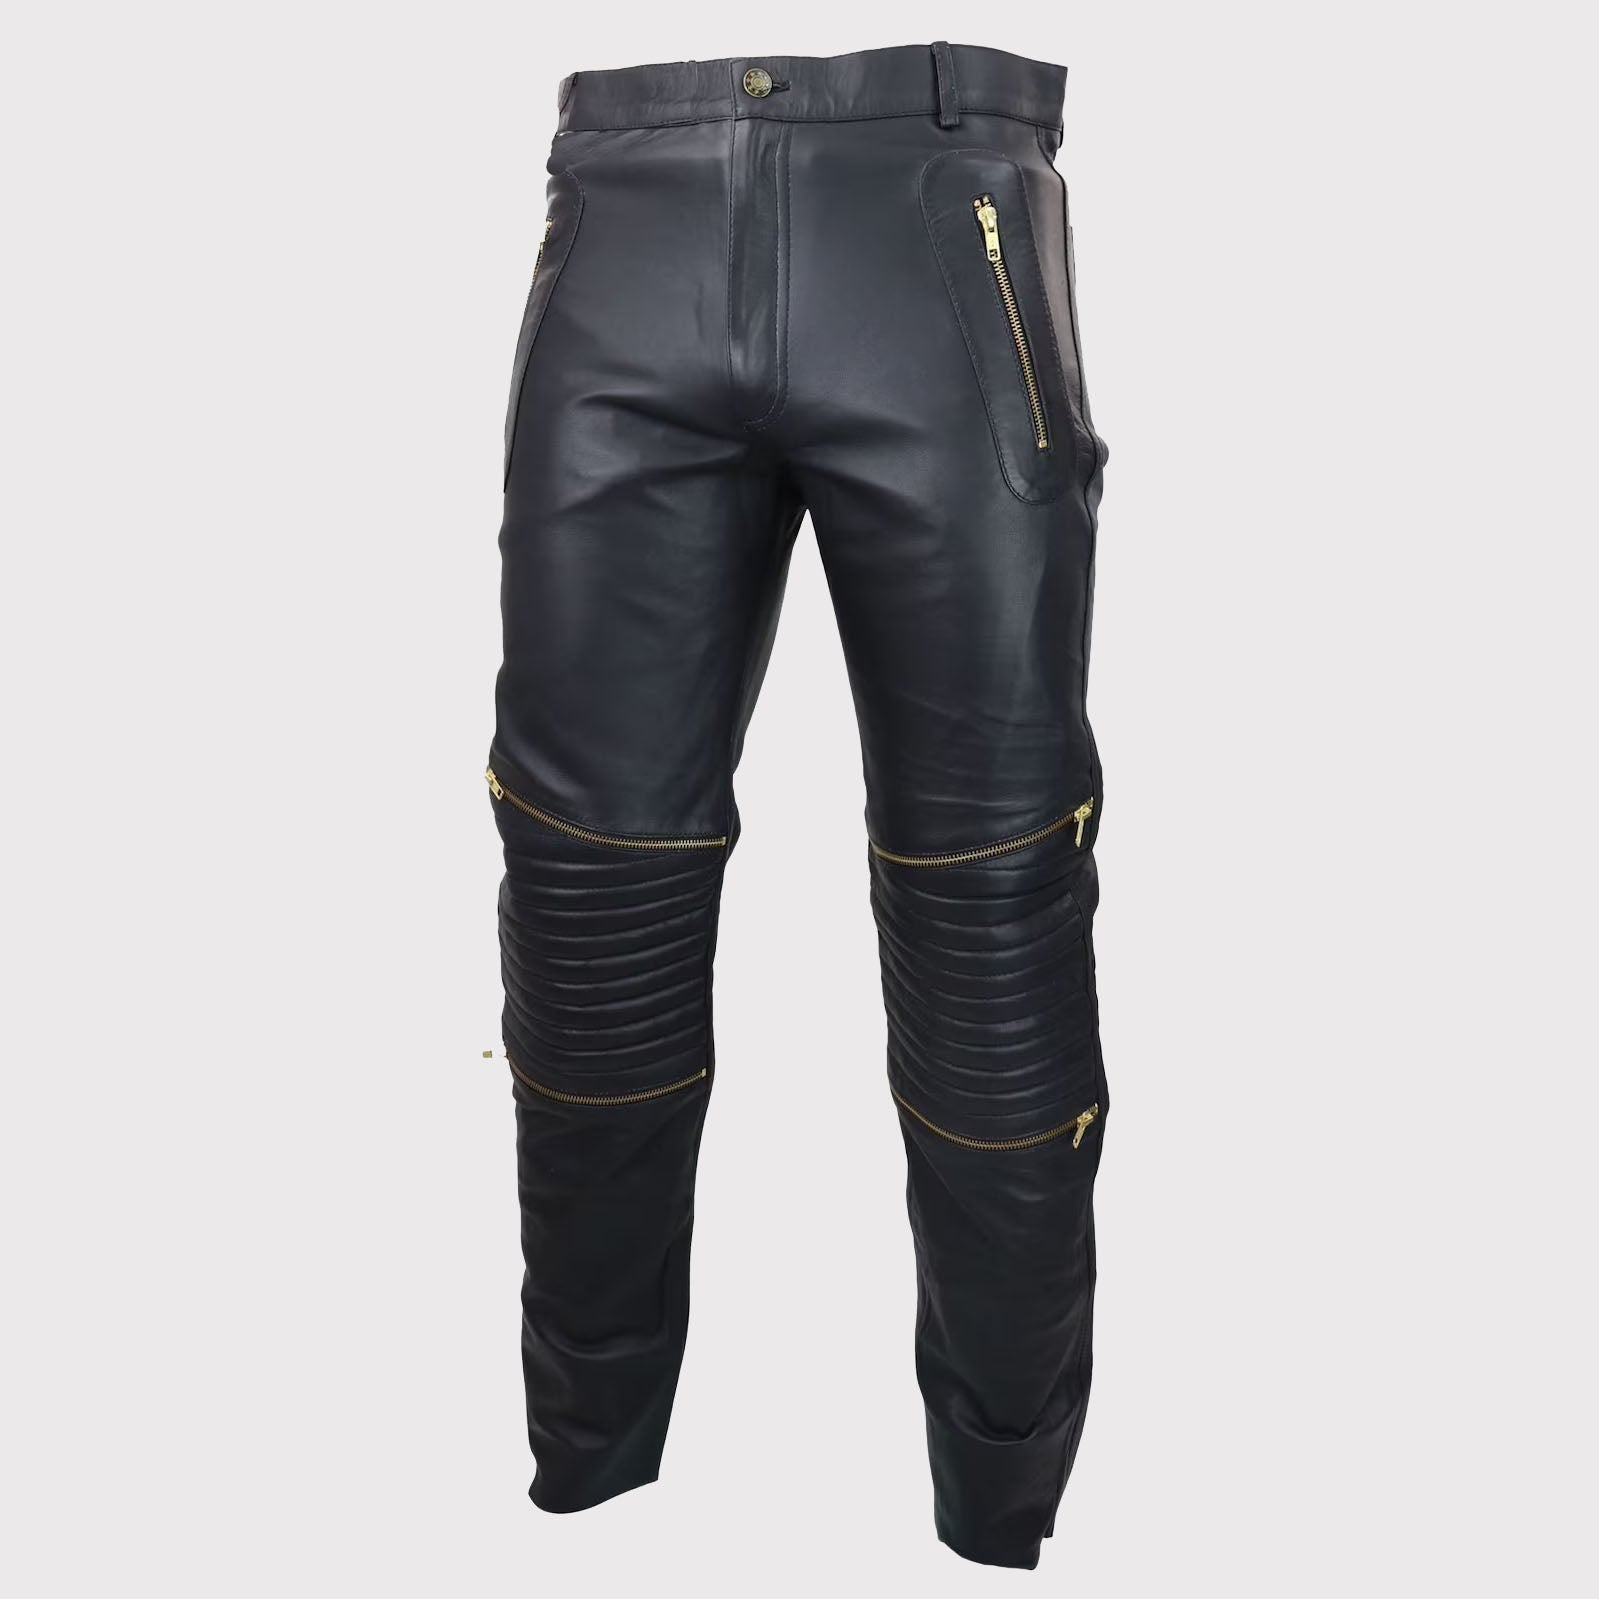 Men's Retro Classic Vintage Black Leather Jeans with Gold Zips - Goth Punk Style